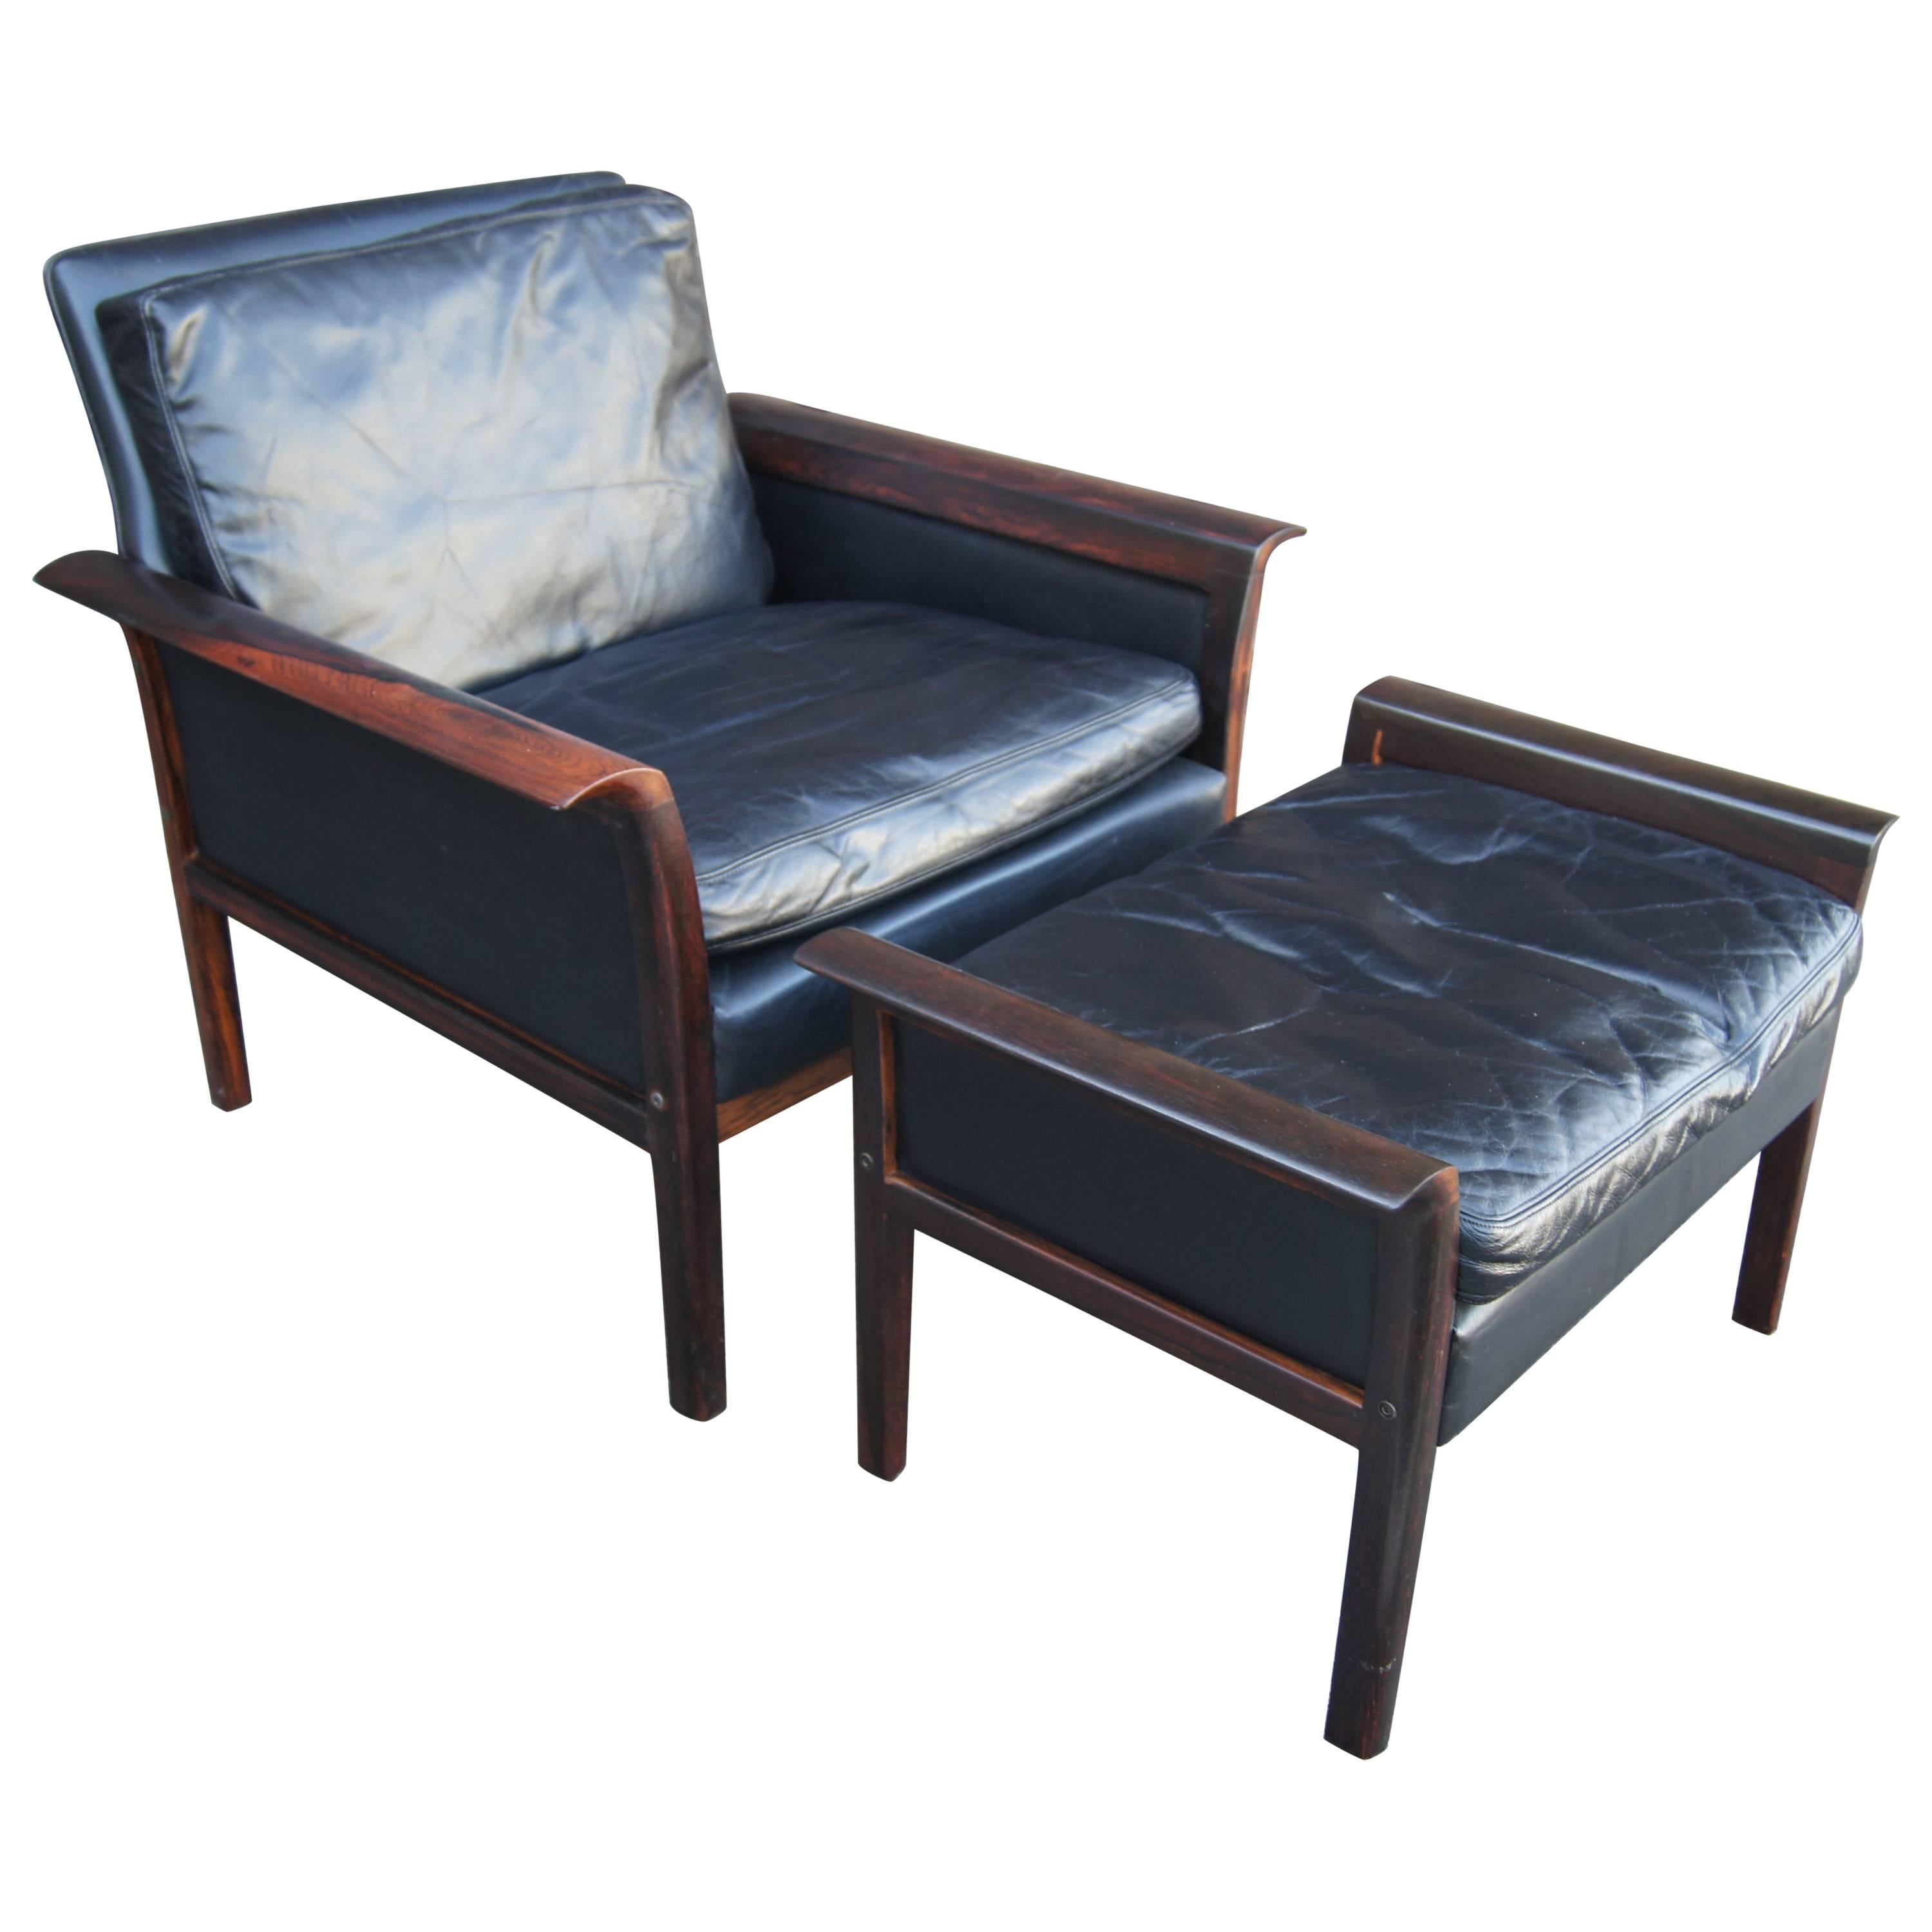 Rosewood and Leather Lounge Chair and Ottoman by Knut Sæter for Vatne Møbler